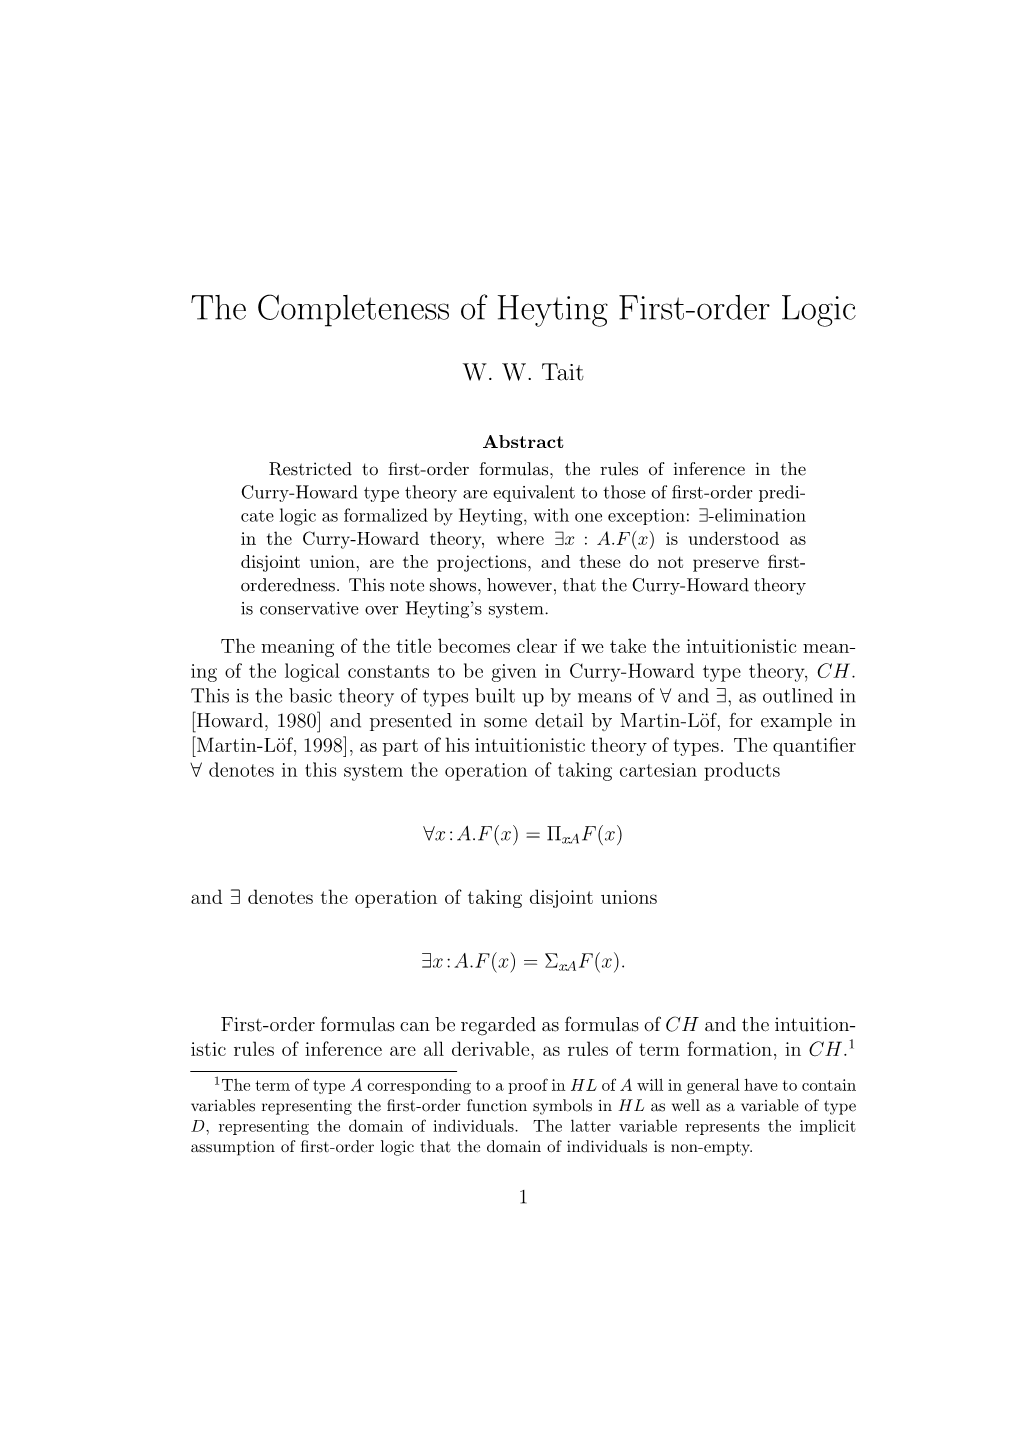 The Completeness of Heyting First-Order Logic